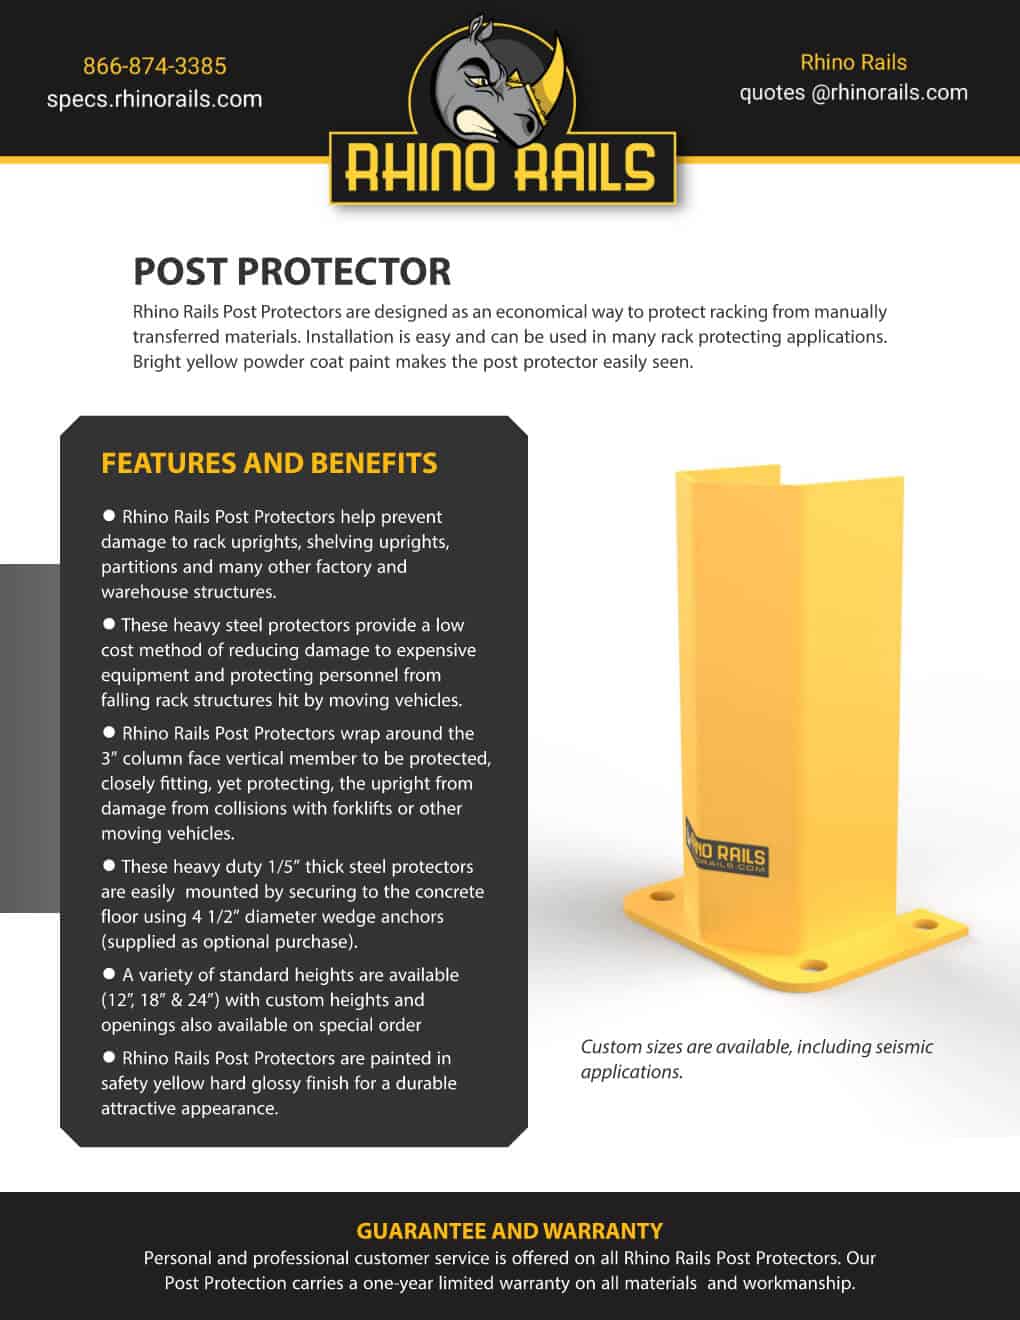 Post Protector - Product Information Sheet - Photo 1